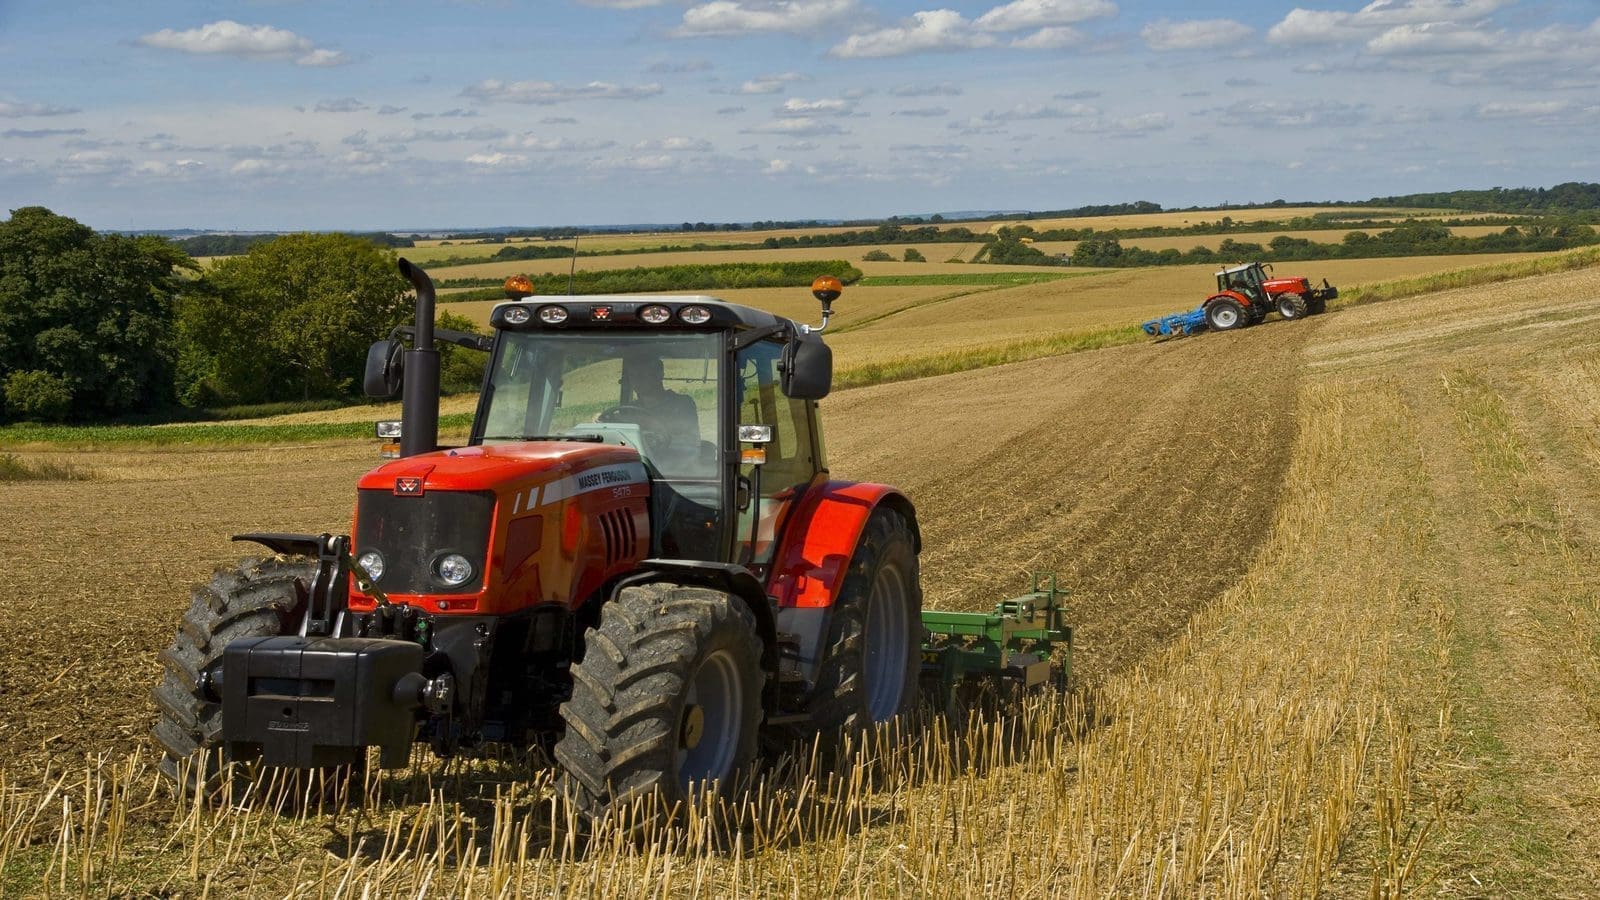 Red tractor embraces public opinion as it revises food standards